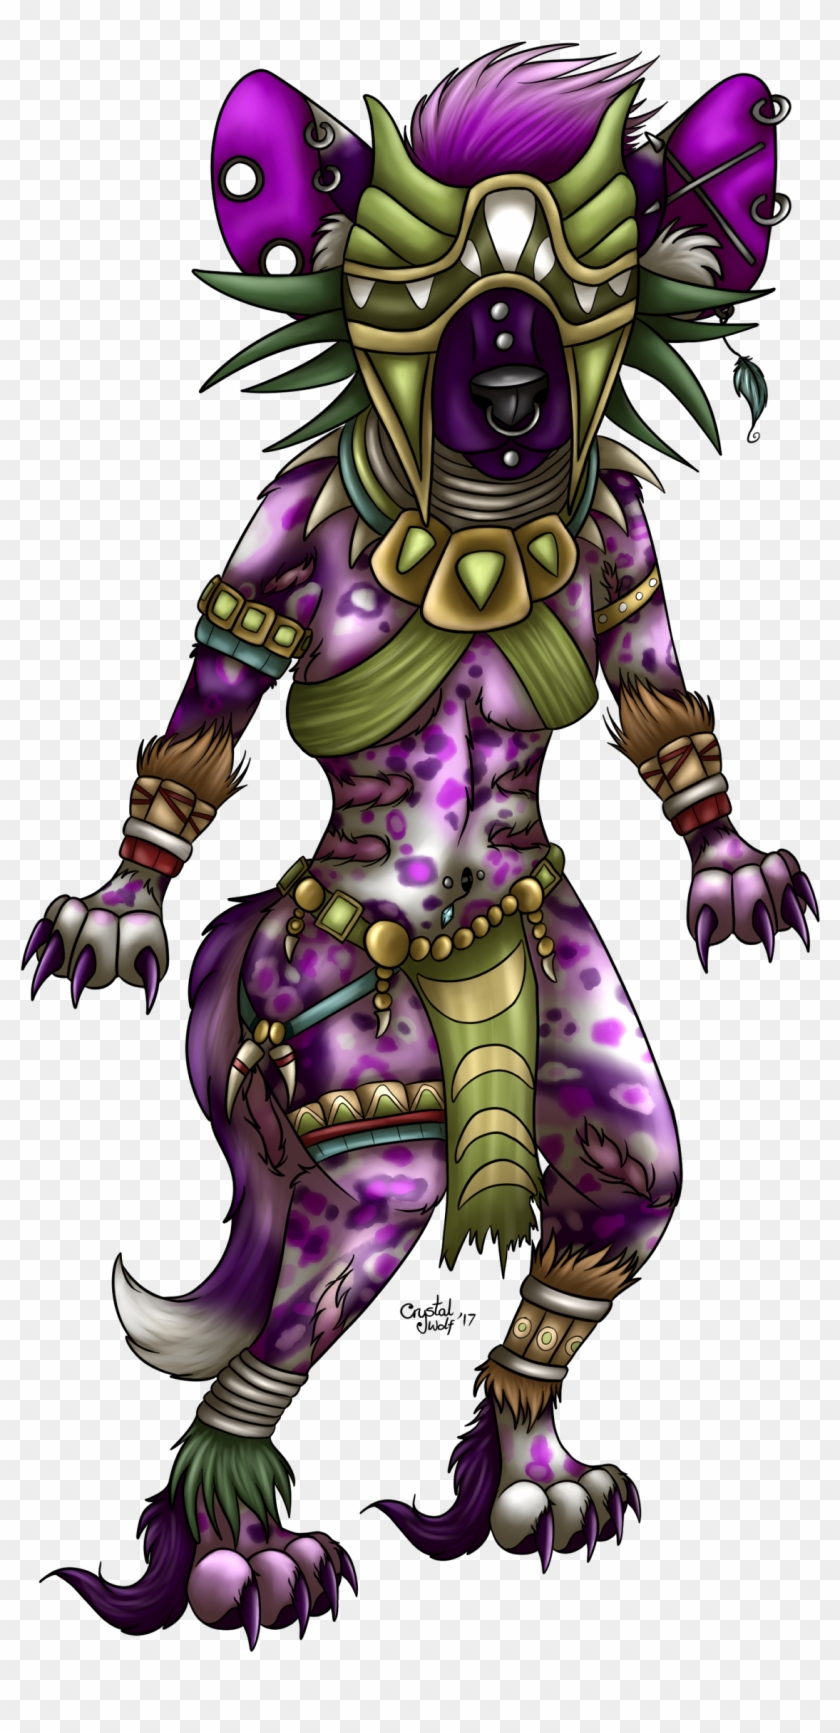 Witch Doctor Cosplay - Illustration Clipart #3901434